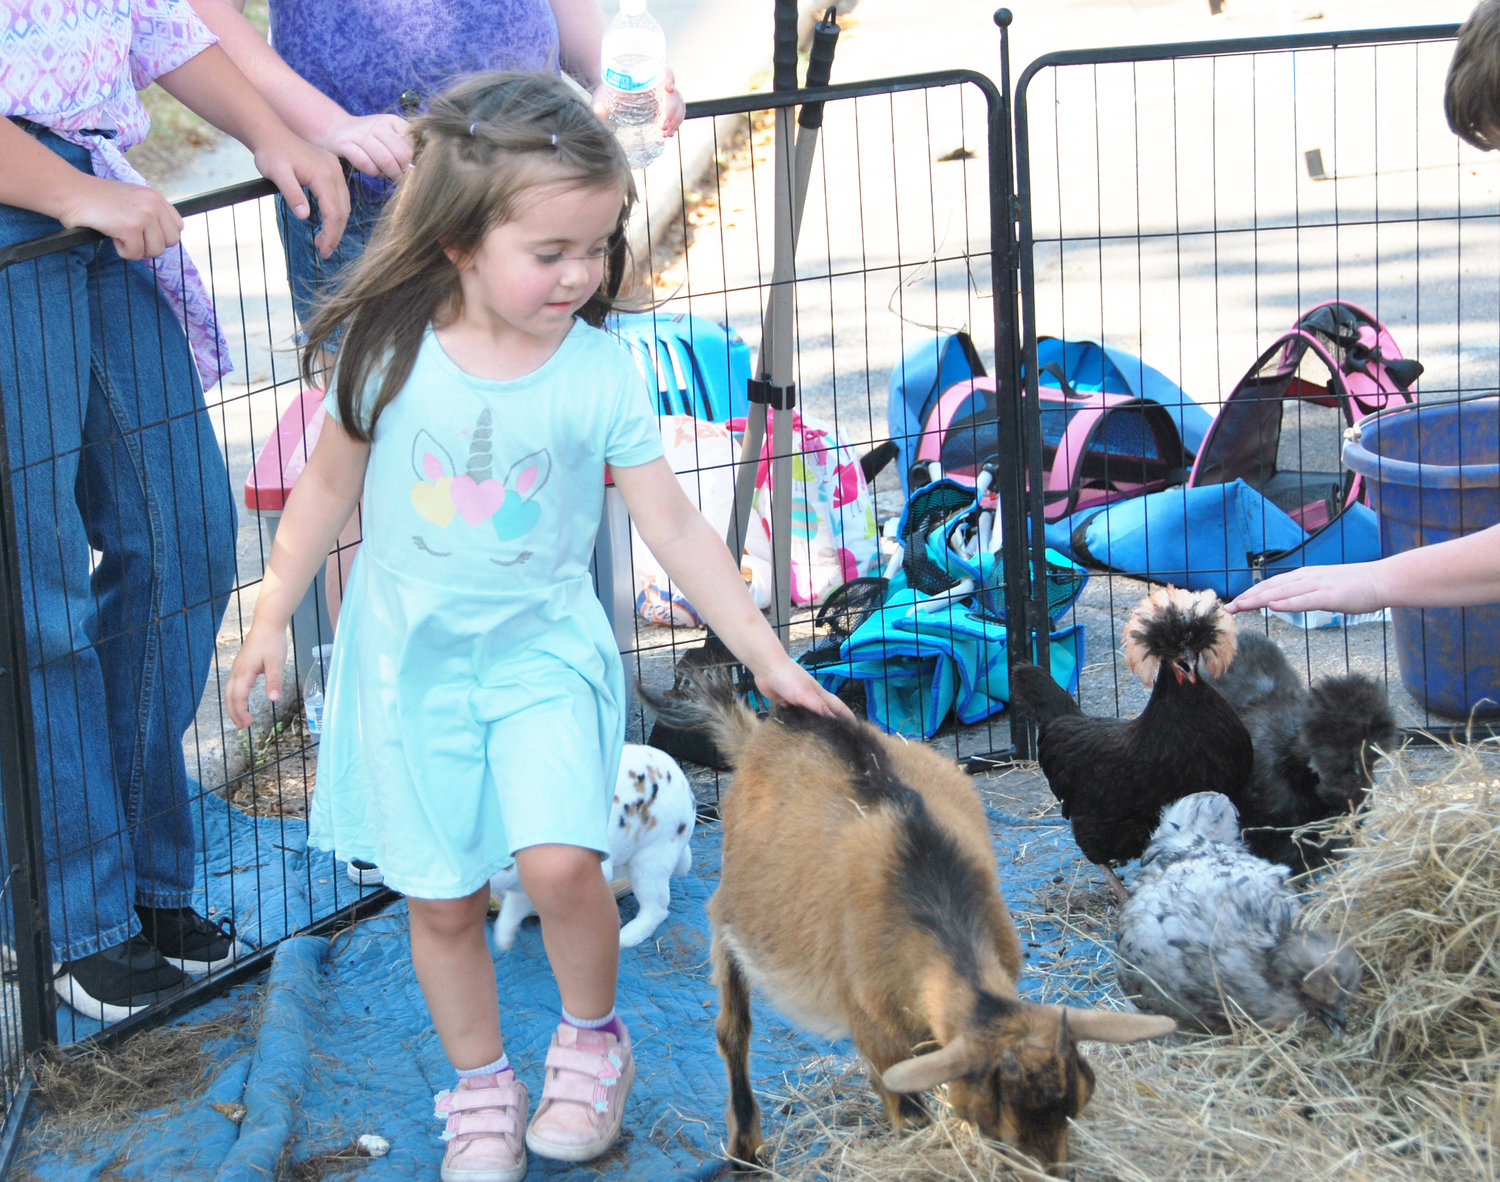 The little ones and some not so little ones liked the petting zoo at the annual Heart of Oklahoma Back to School Bash.